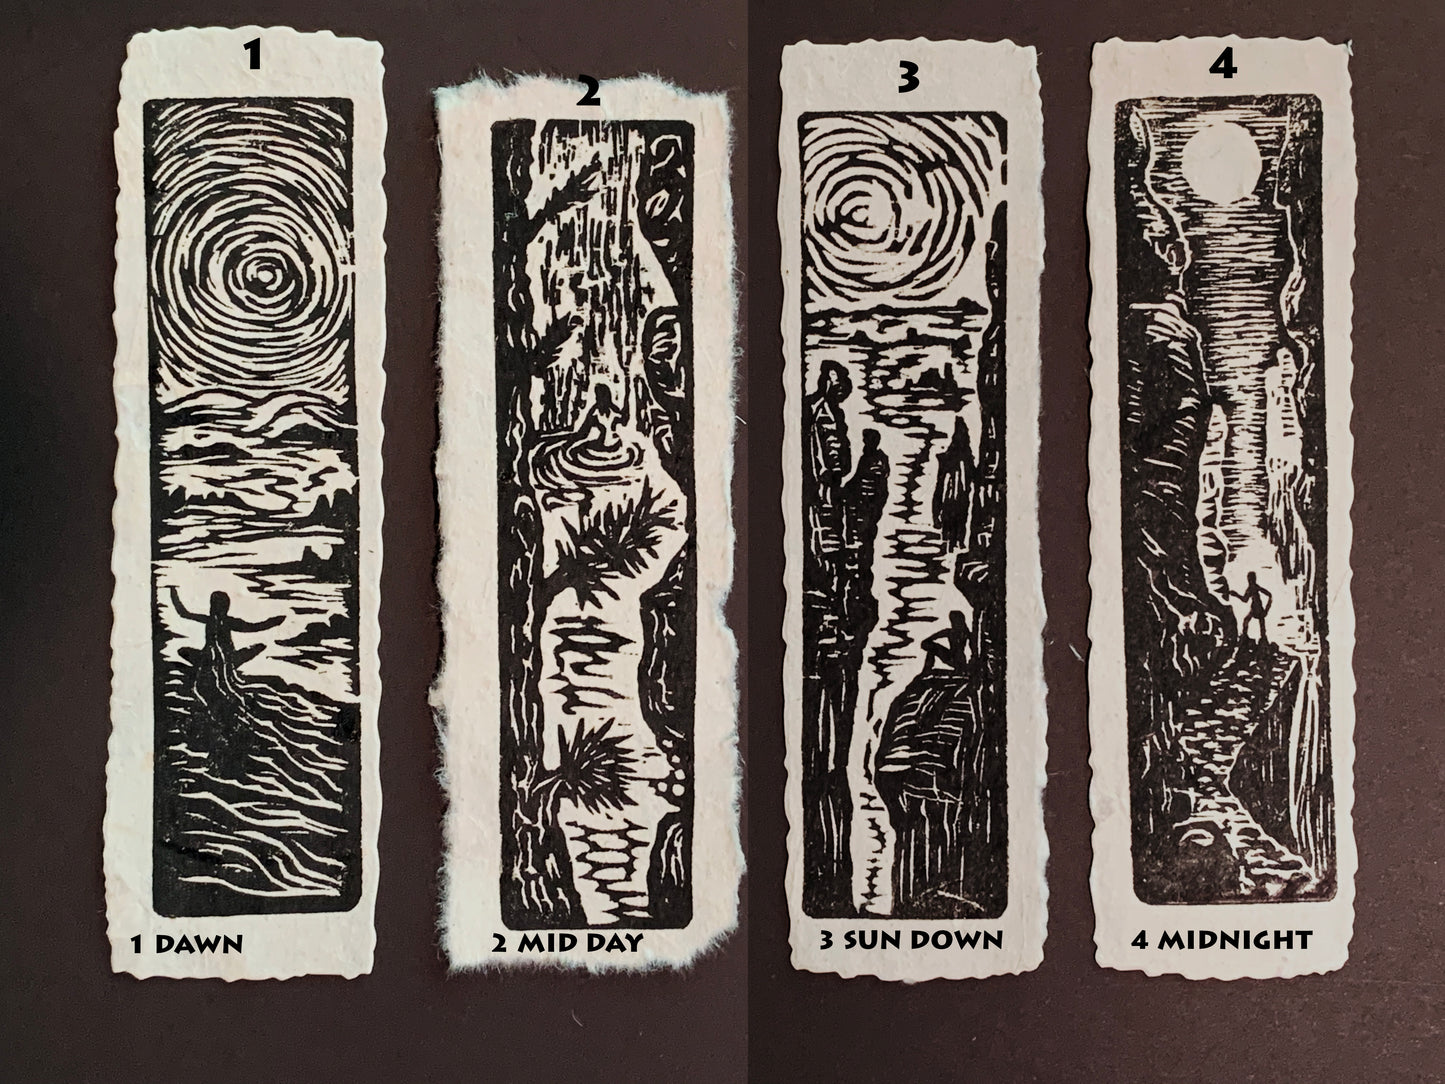 Hikers SET 4 Original Woodcut Prints Day in Nature Collection Black